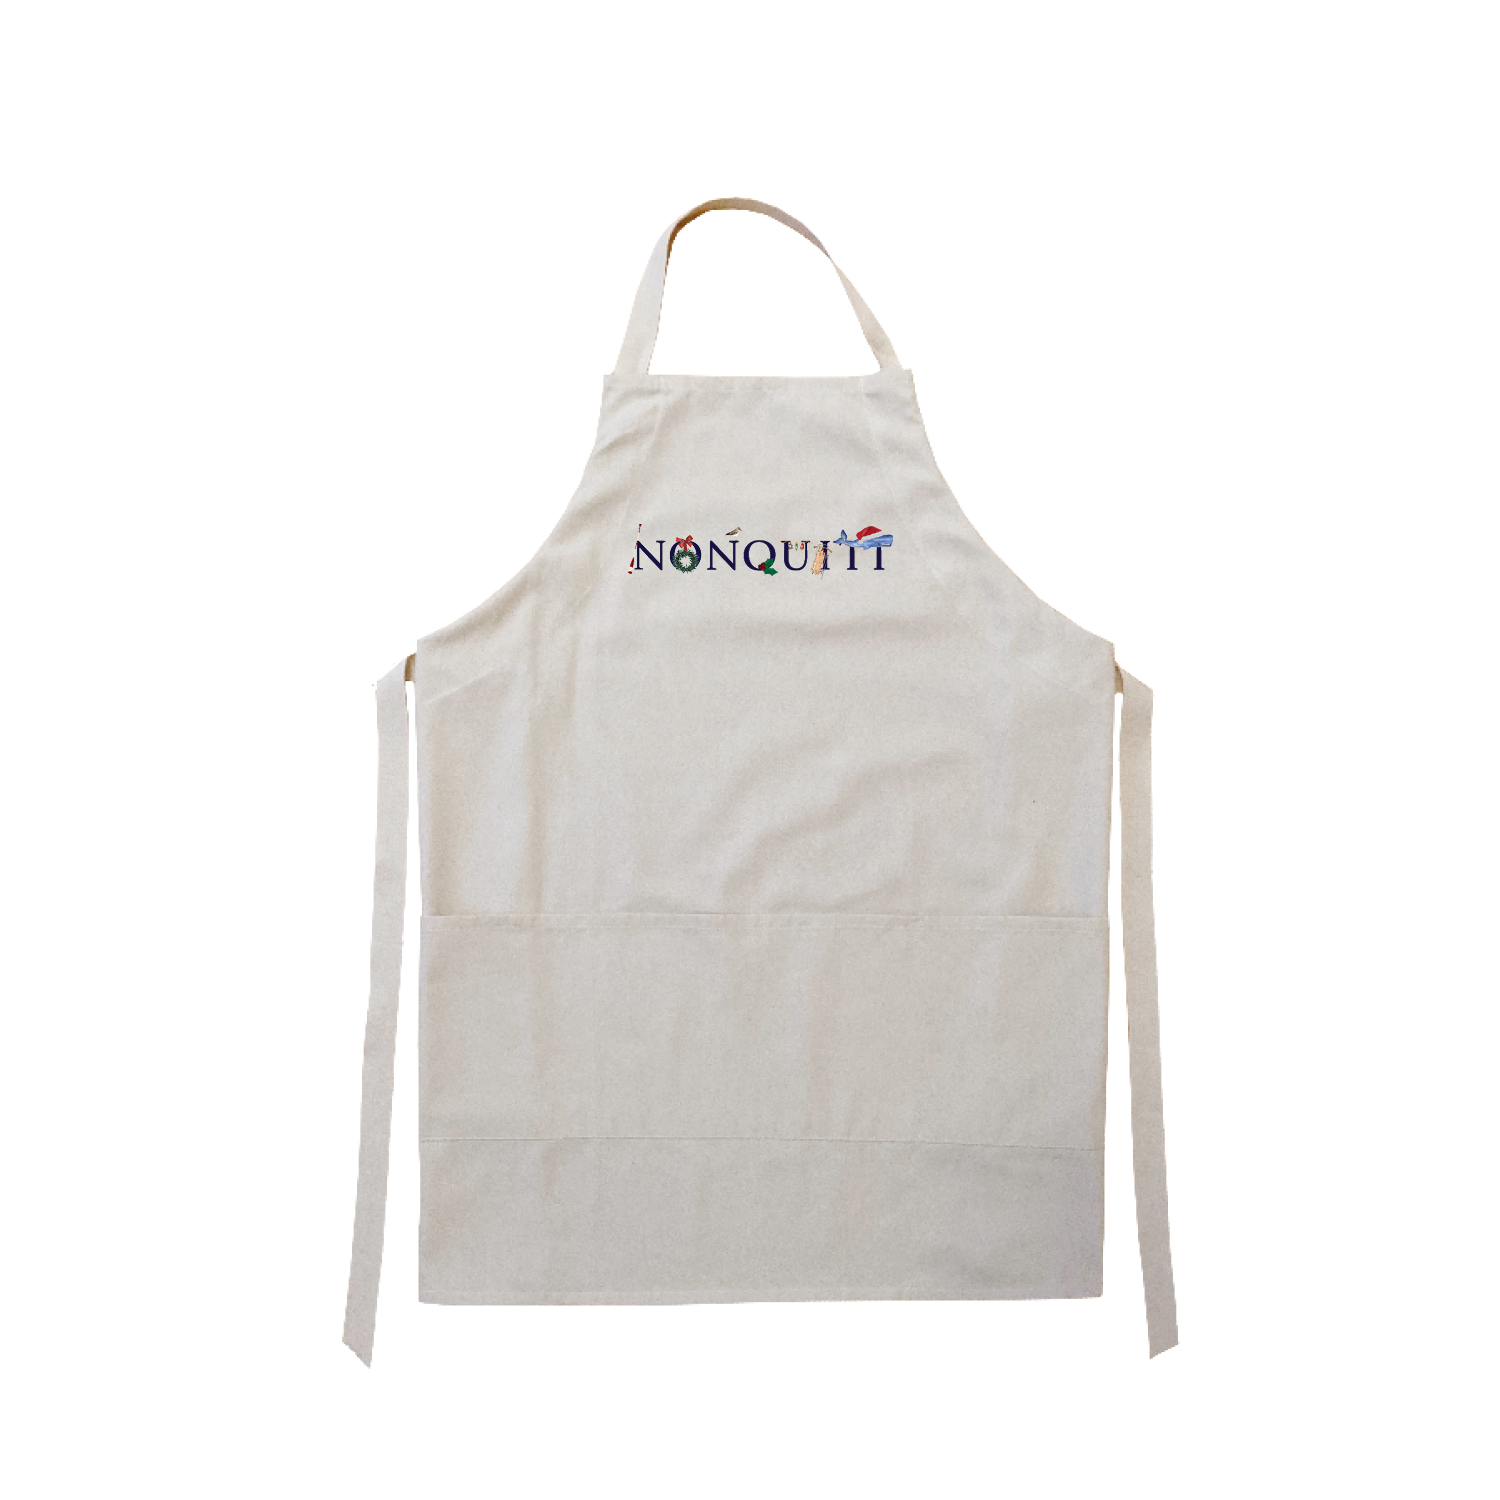 nonquitt holiday apron